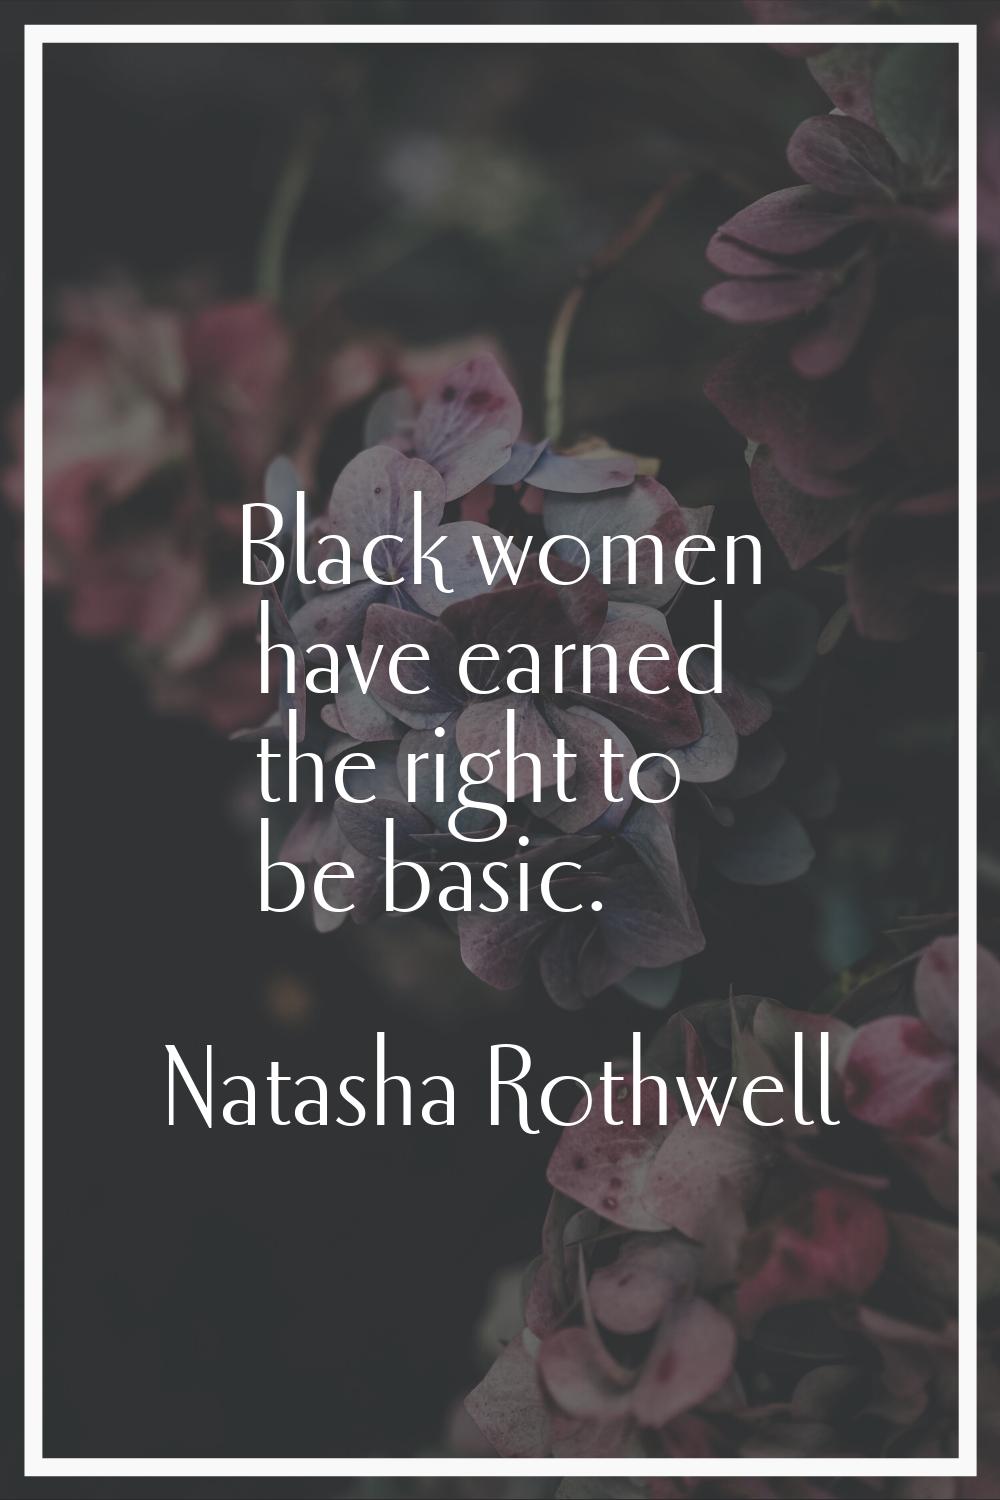 Black women have earned the right to be basic.